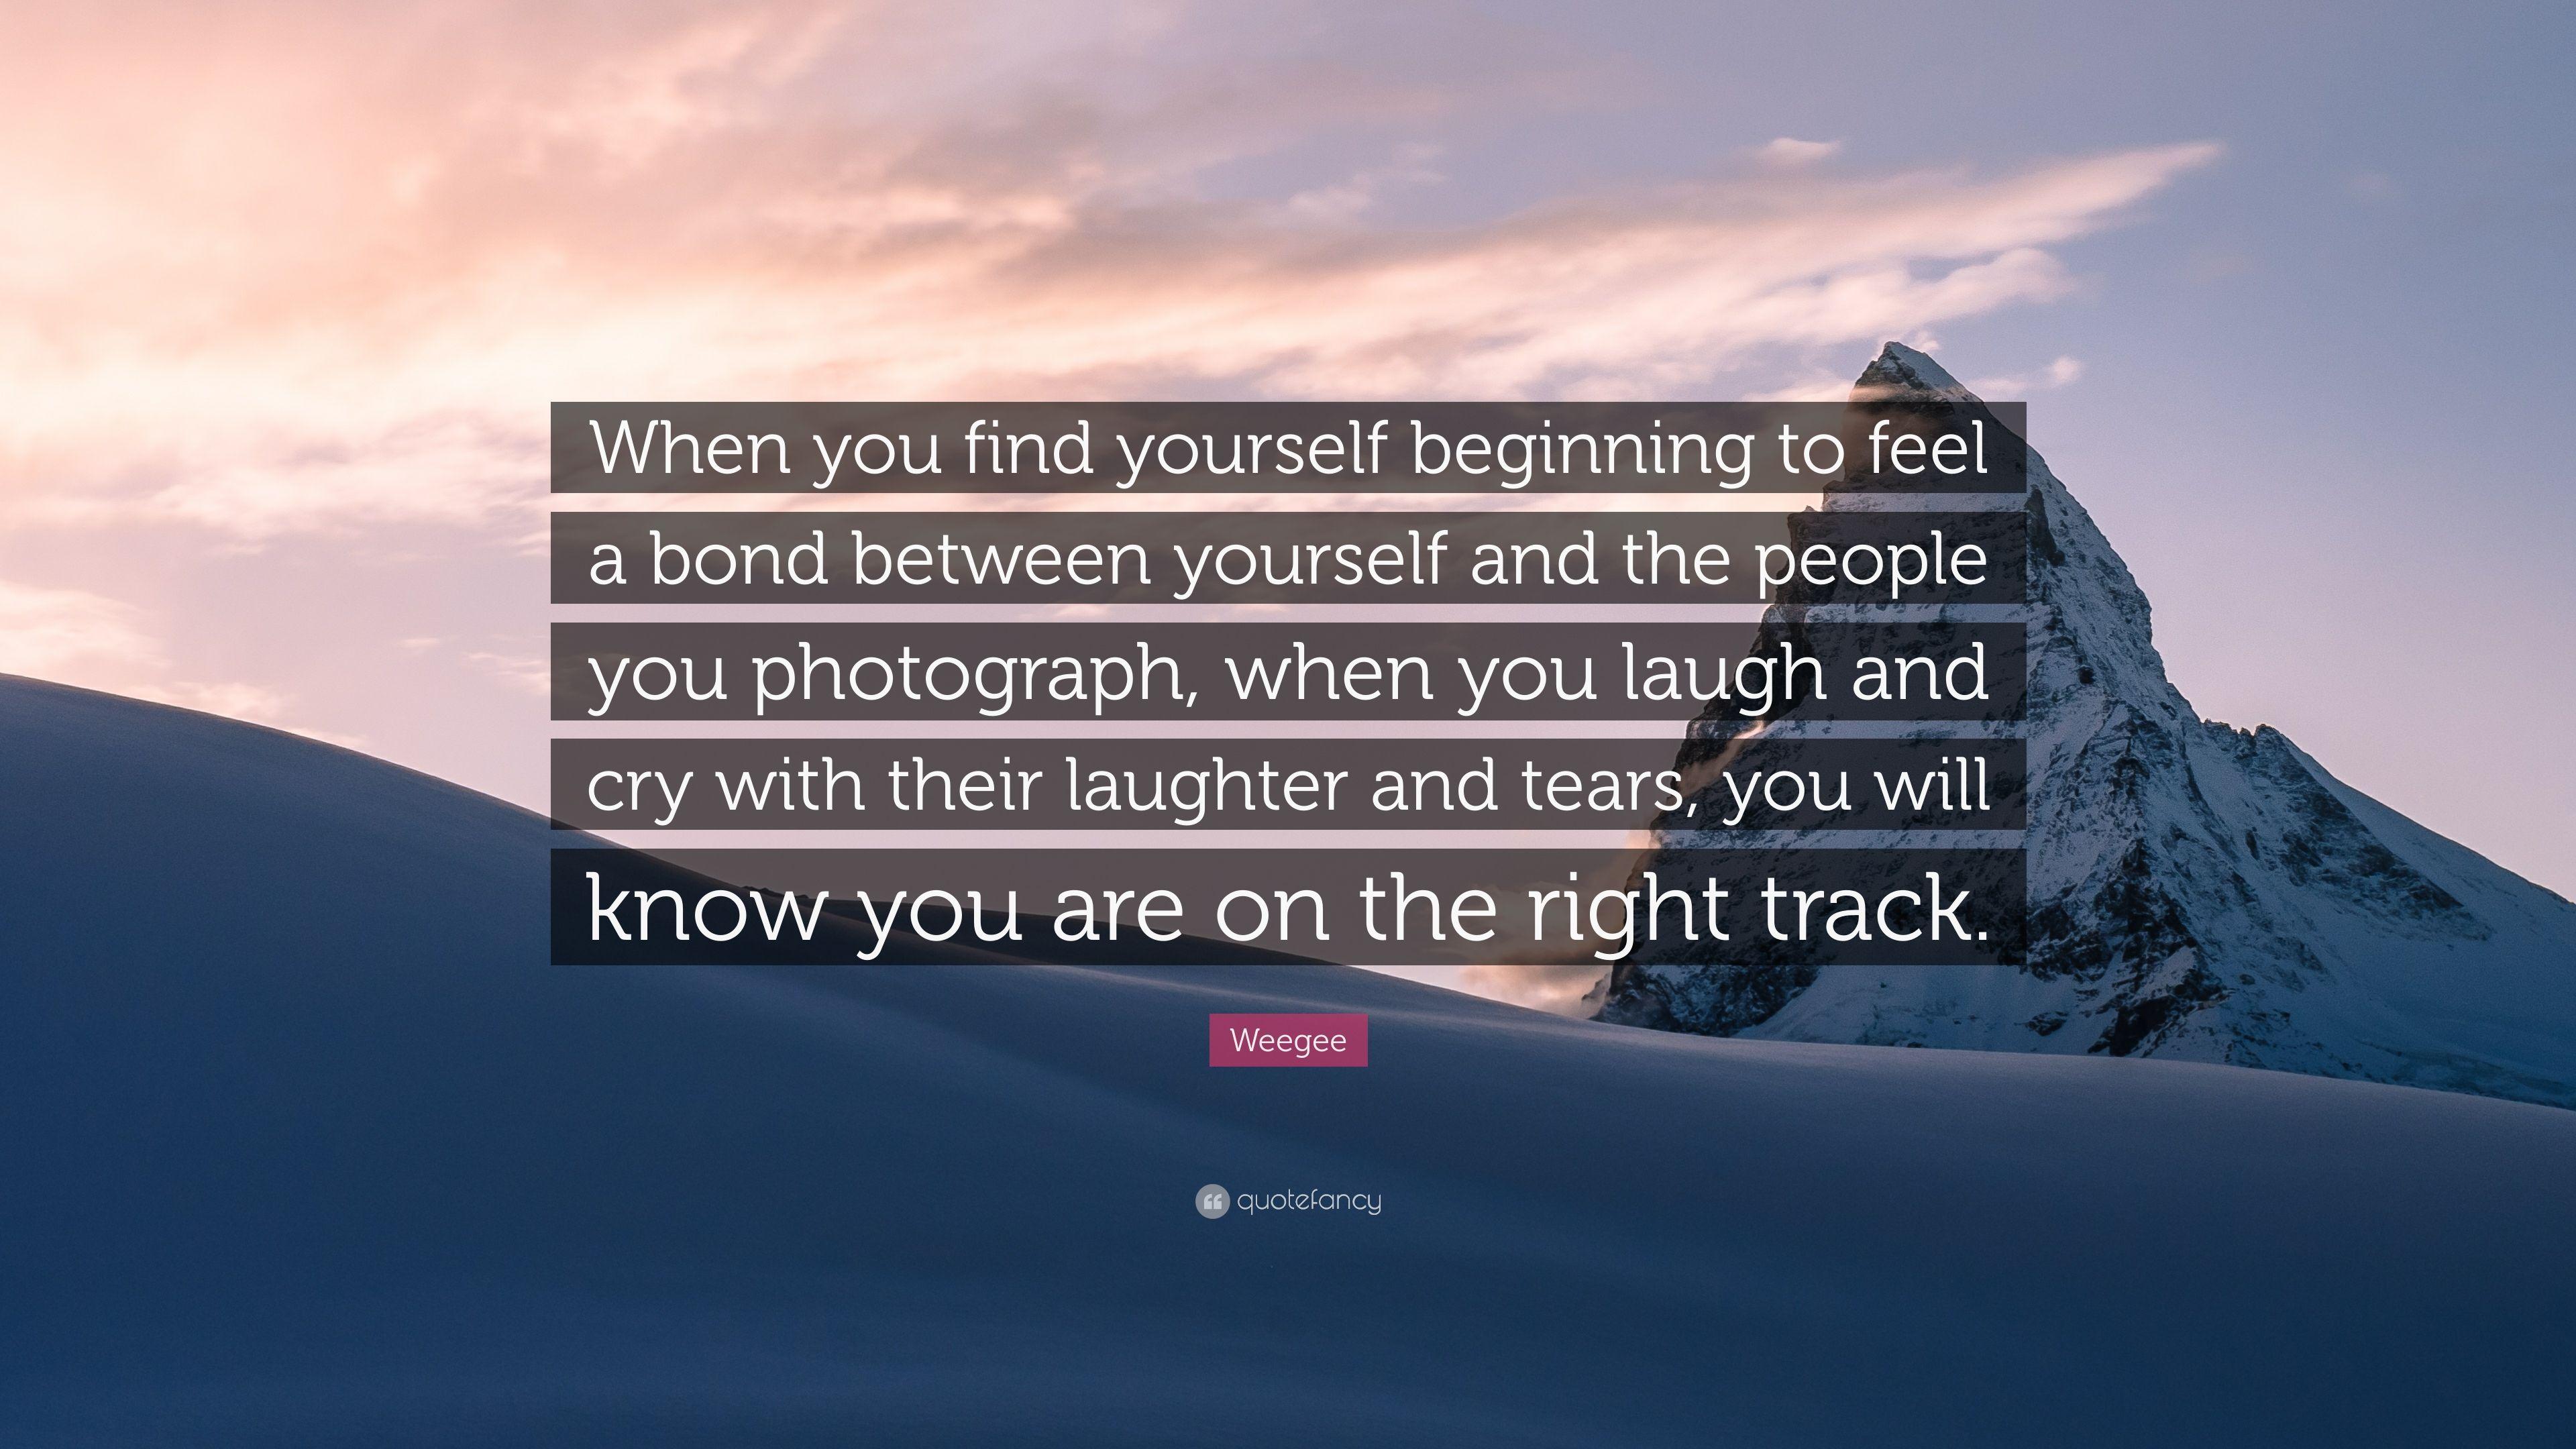 Weegee Quote: “When you find yourself beginning to feel a